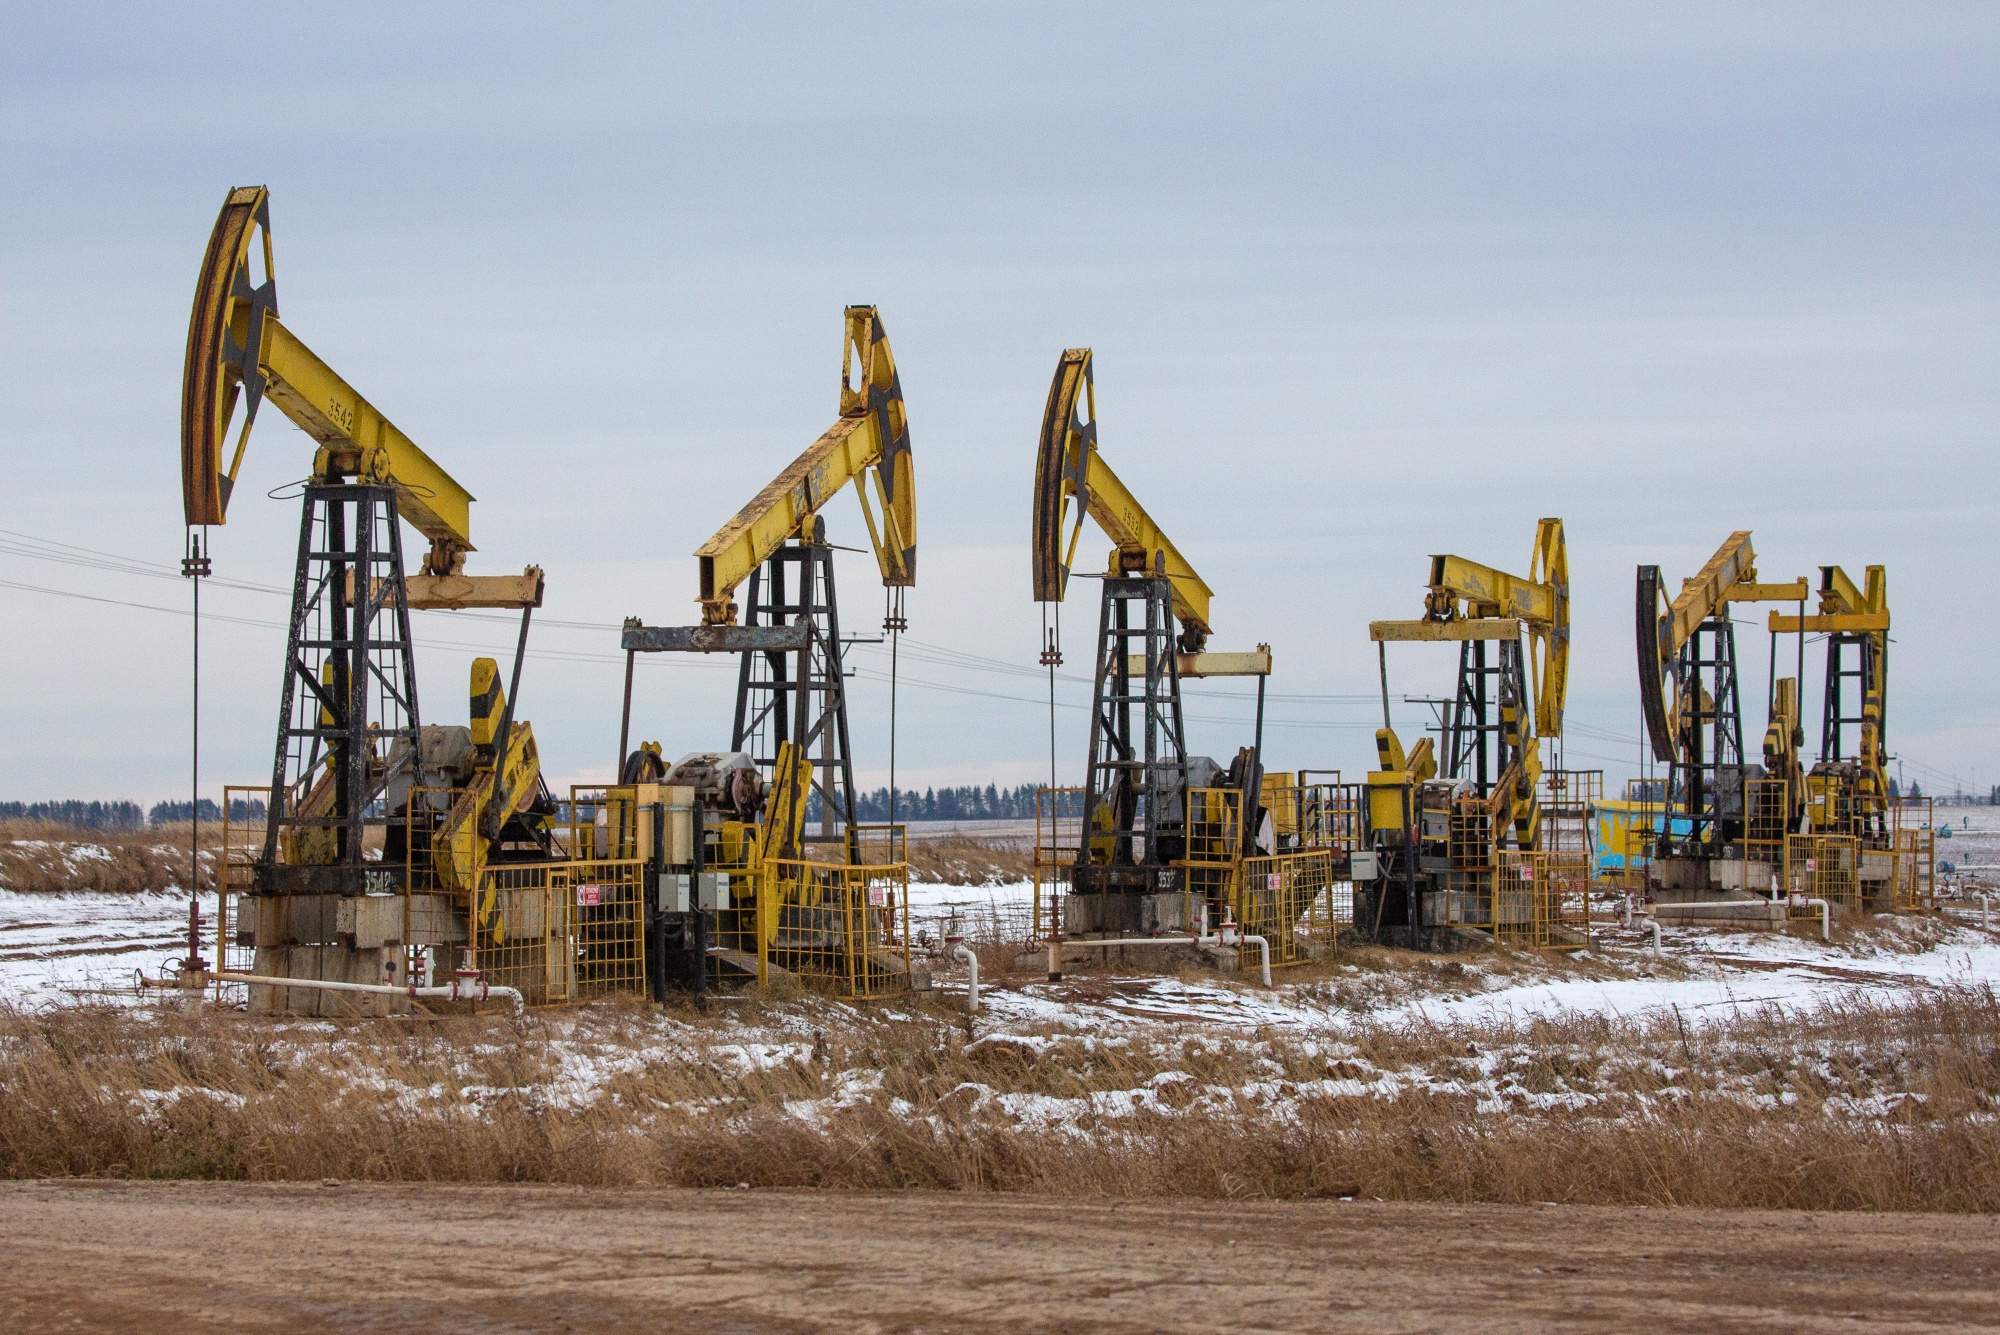 Oil pumping jacks, also known as &quot;nodding donkeys&quot;in a Rosneft Oil Co. oilfield near Sokolovka village, in the Udmurt Republic, Russia, on Friday, Nov. 20, 2020.&nbsp;